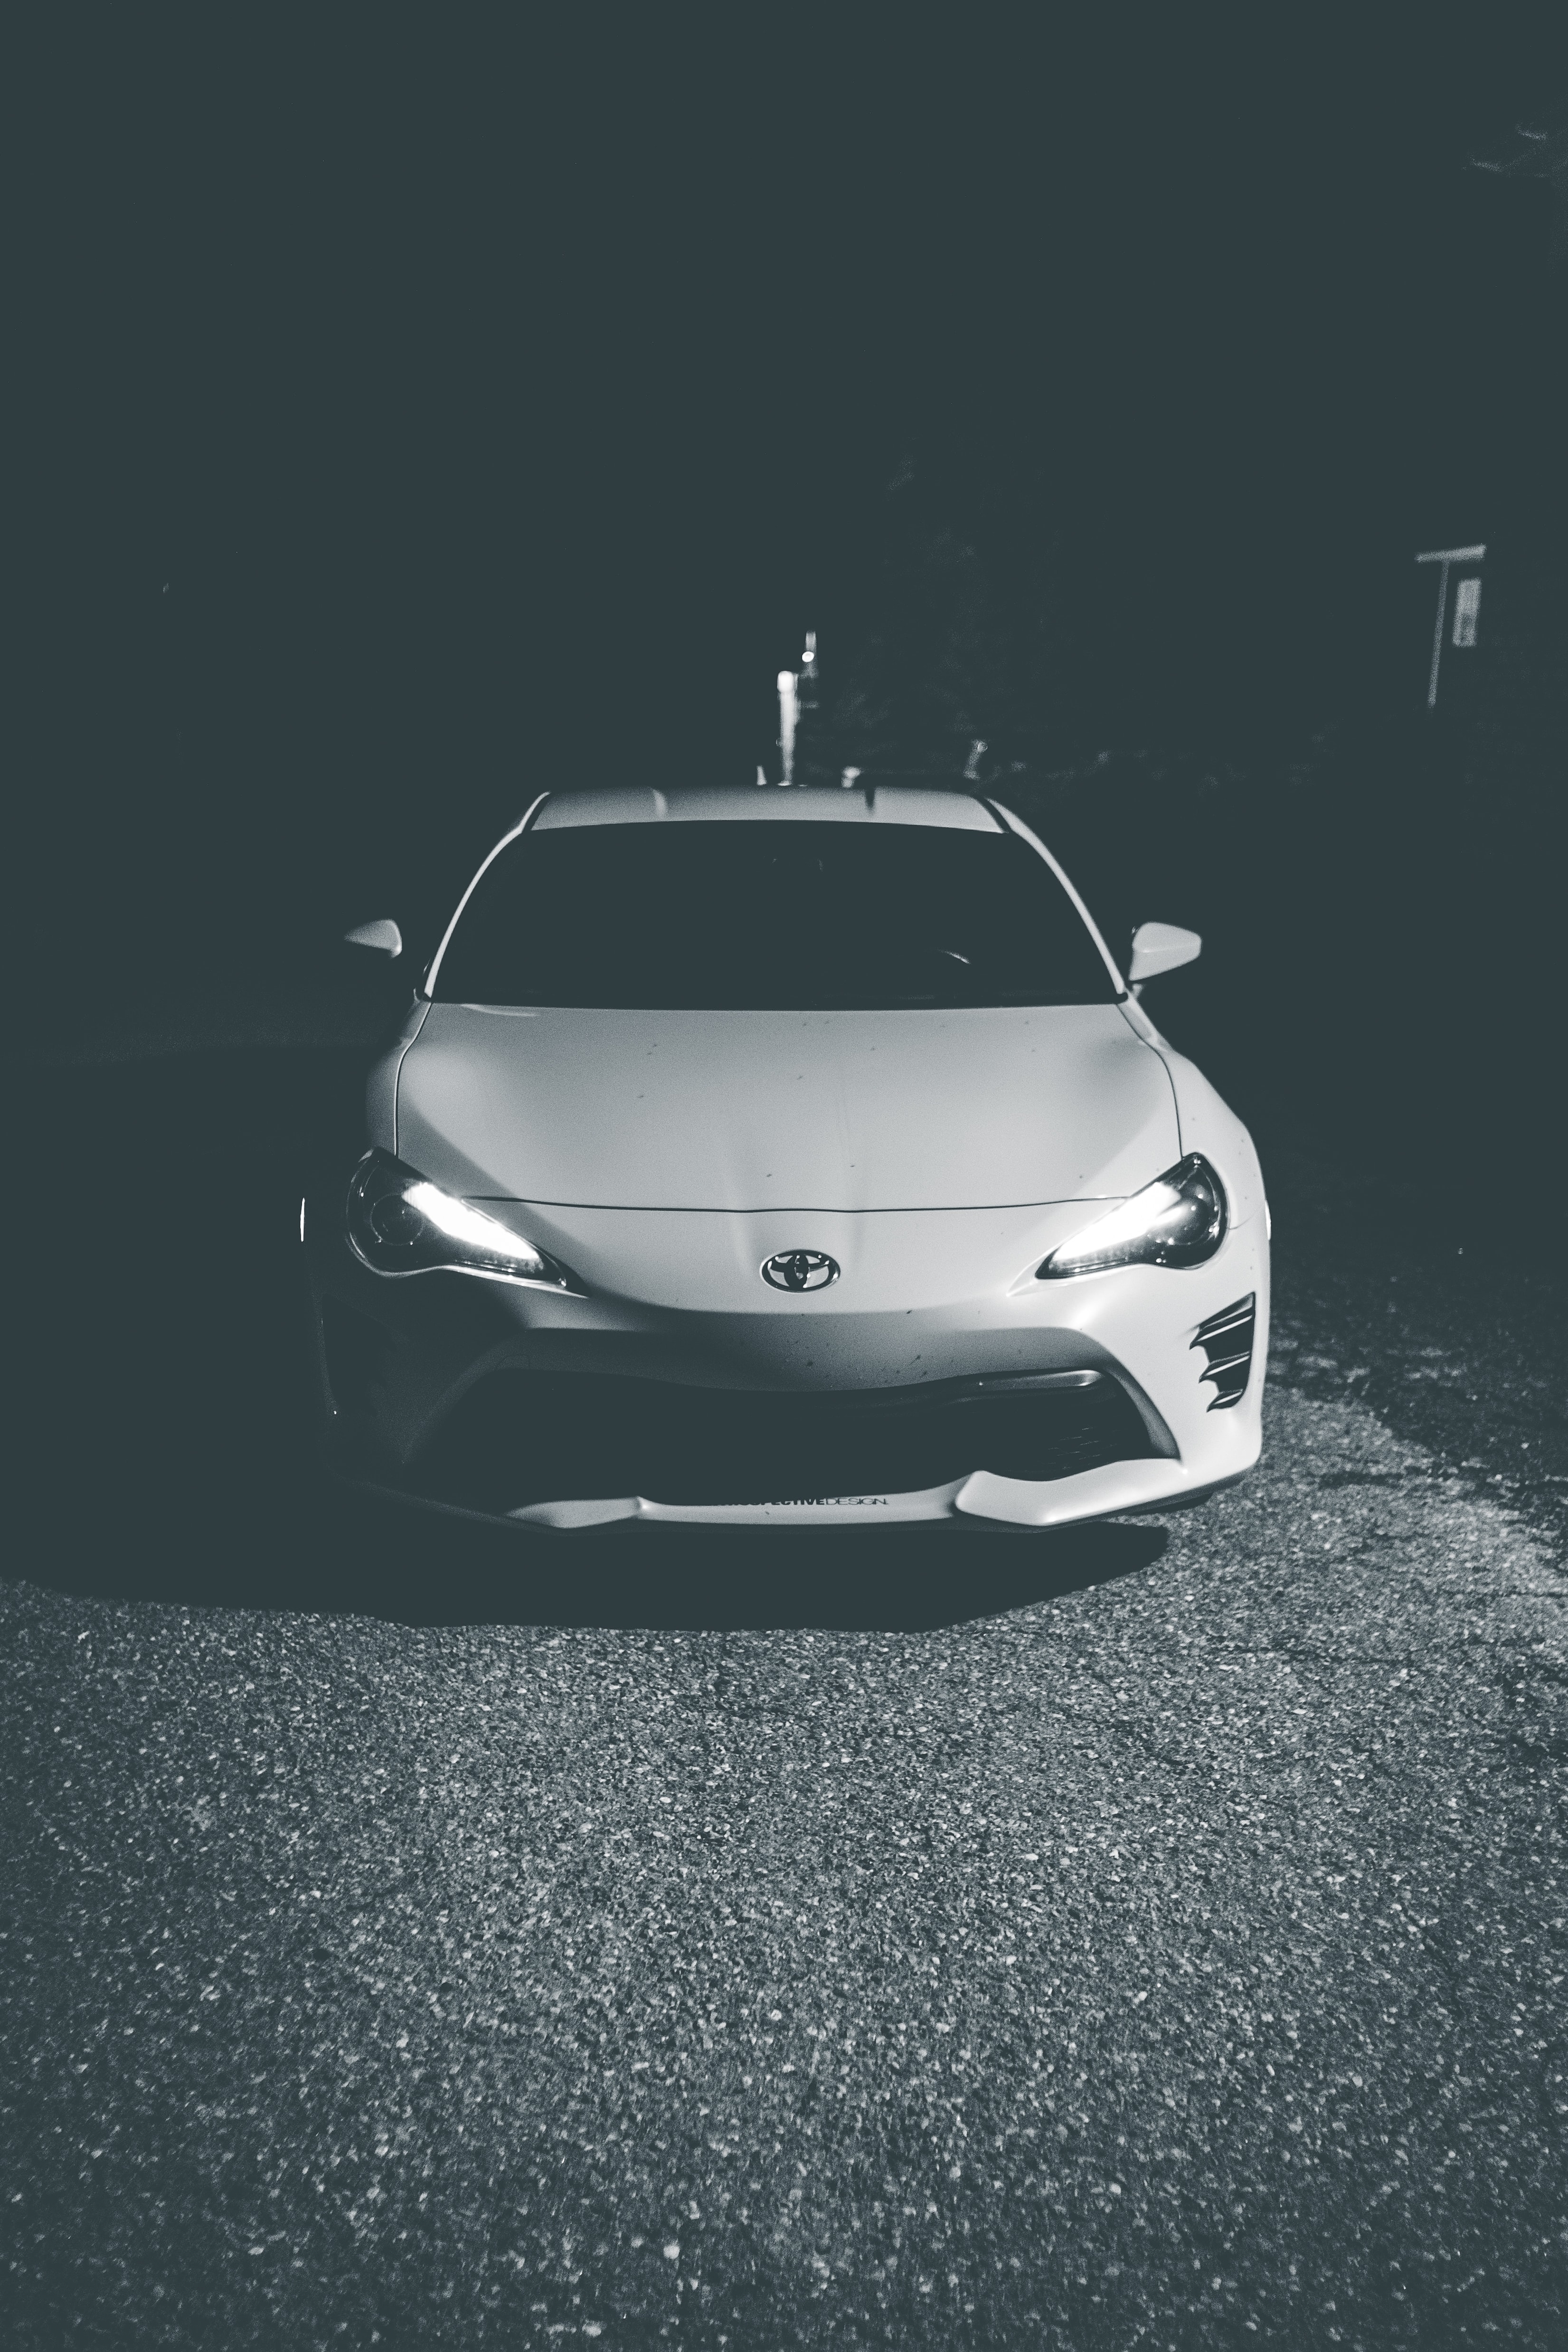 cars, toyota, lights, car, front view, machine, bw, chb, headlights High Definition image